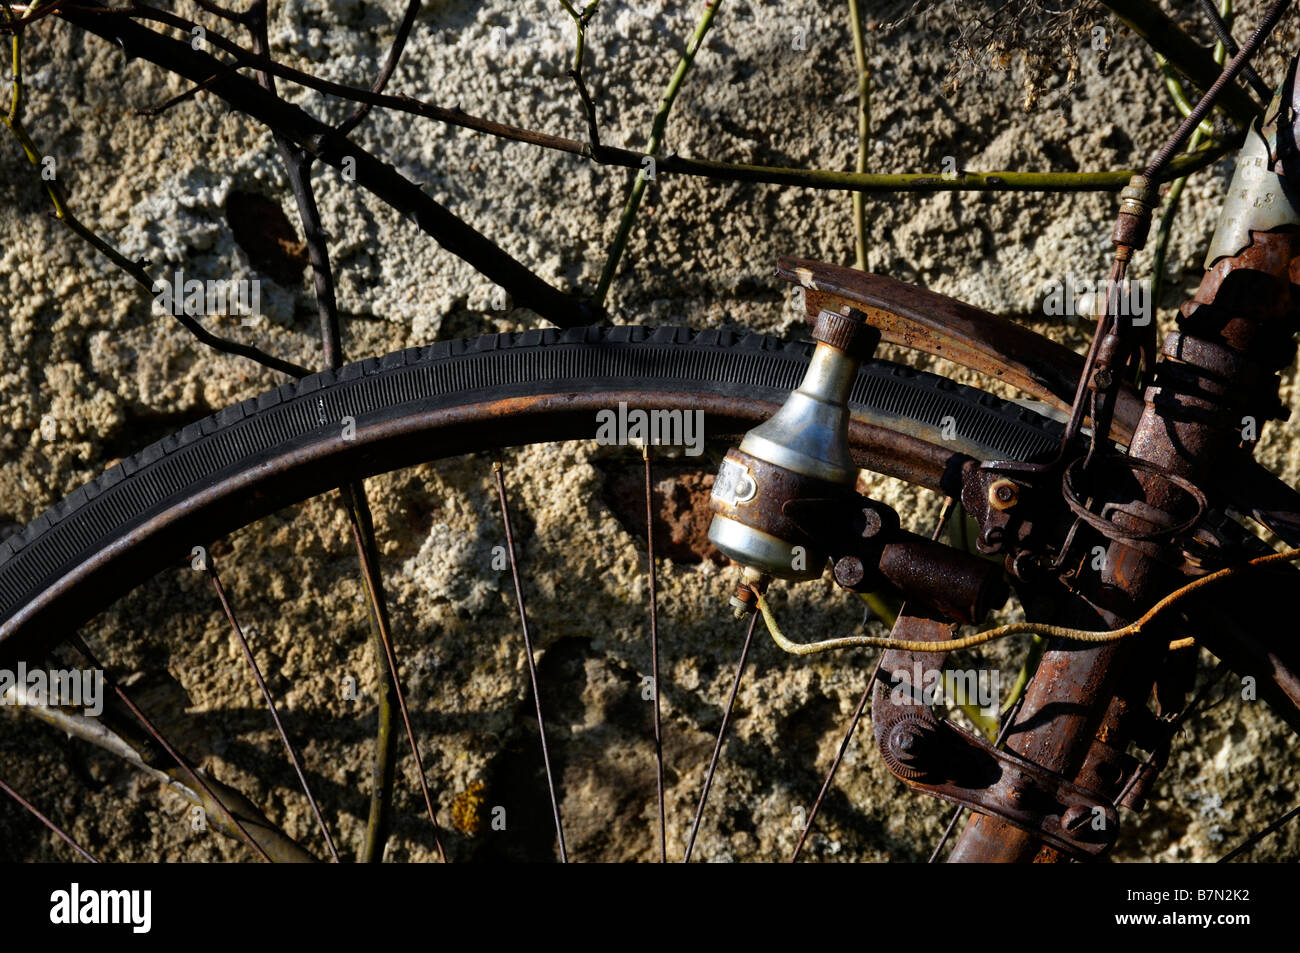 Stock photo of a very old rusty bike left leaning against a wall Stock Photo